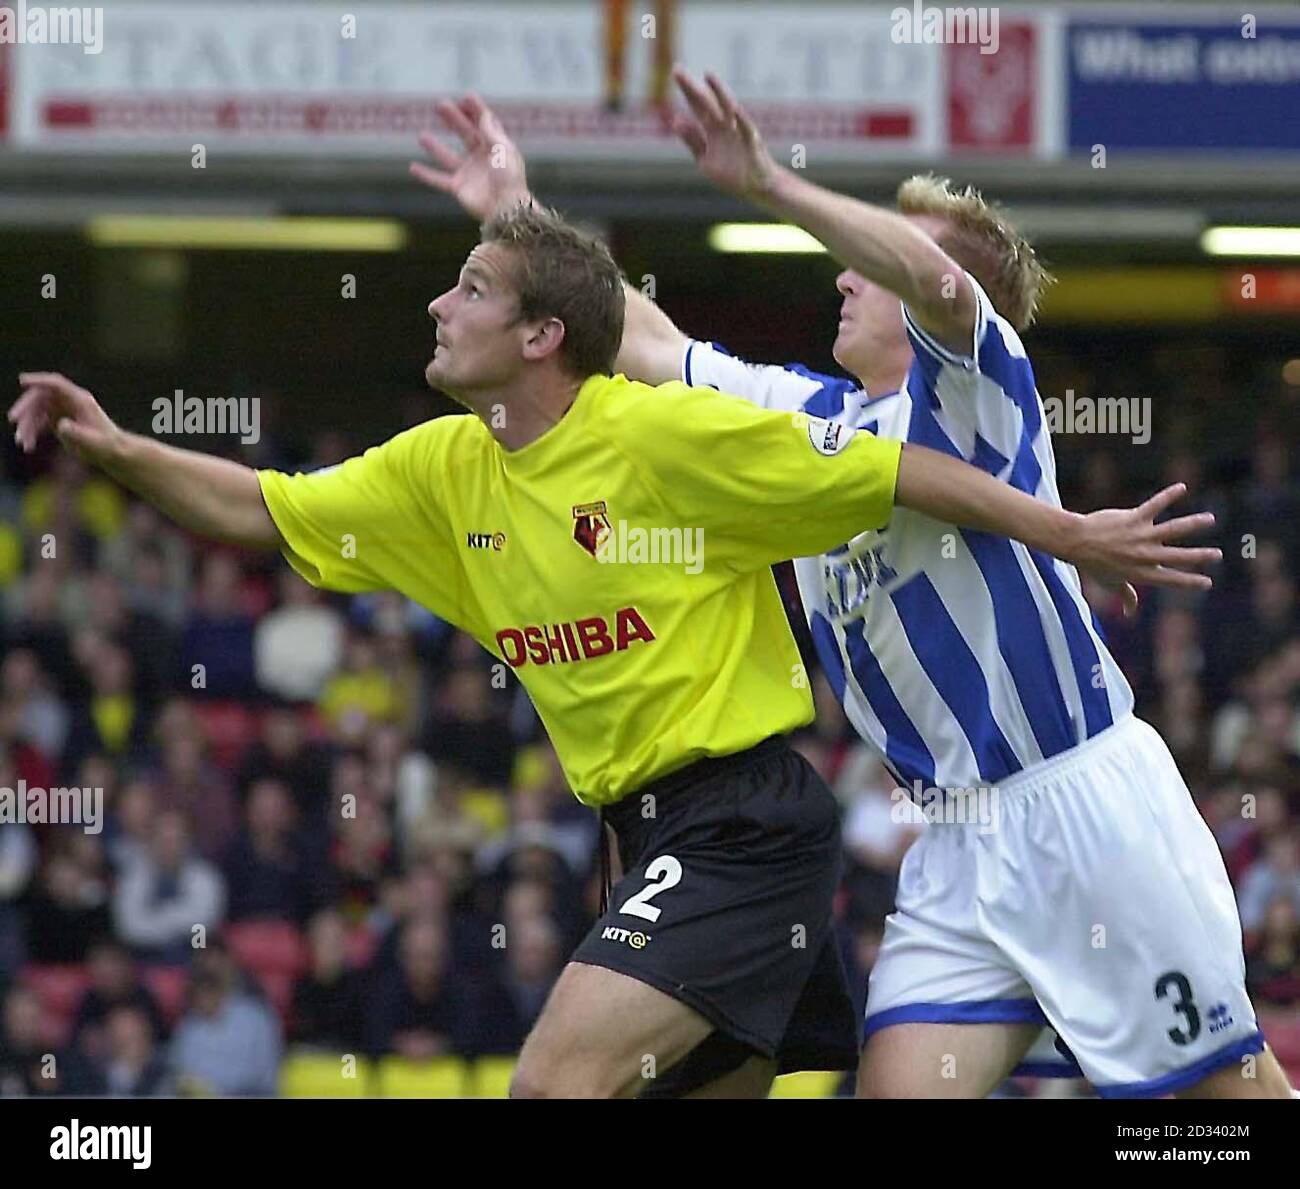 Watford's Neal Ardley (L) and Brighton's Kerry Mayo go for the high ball during their Nationwide Division One match at Watford's Vicarage Road ground. THIS PICTURE CAN ONLY BE USED WITHIN THE CONTEXT OF AN EDITORIAL FEATURE. NO UNOFFICIAL CLUB WEBSITE USE. Stock Photo